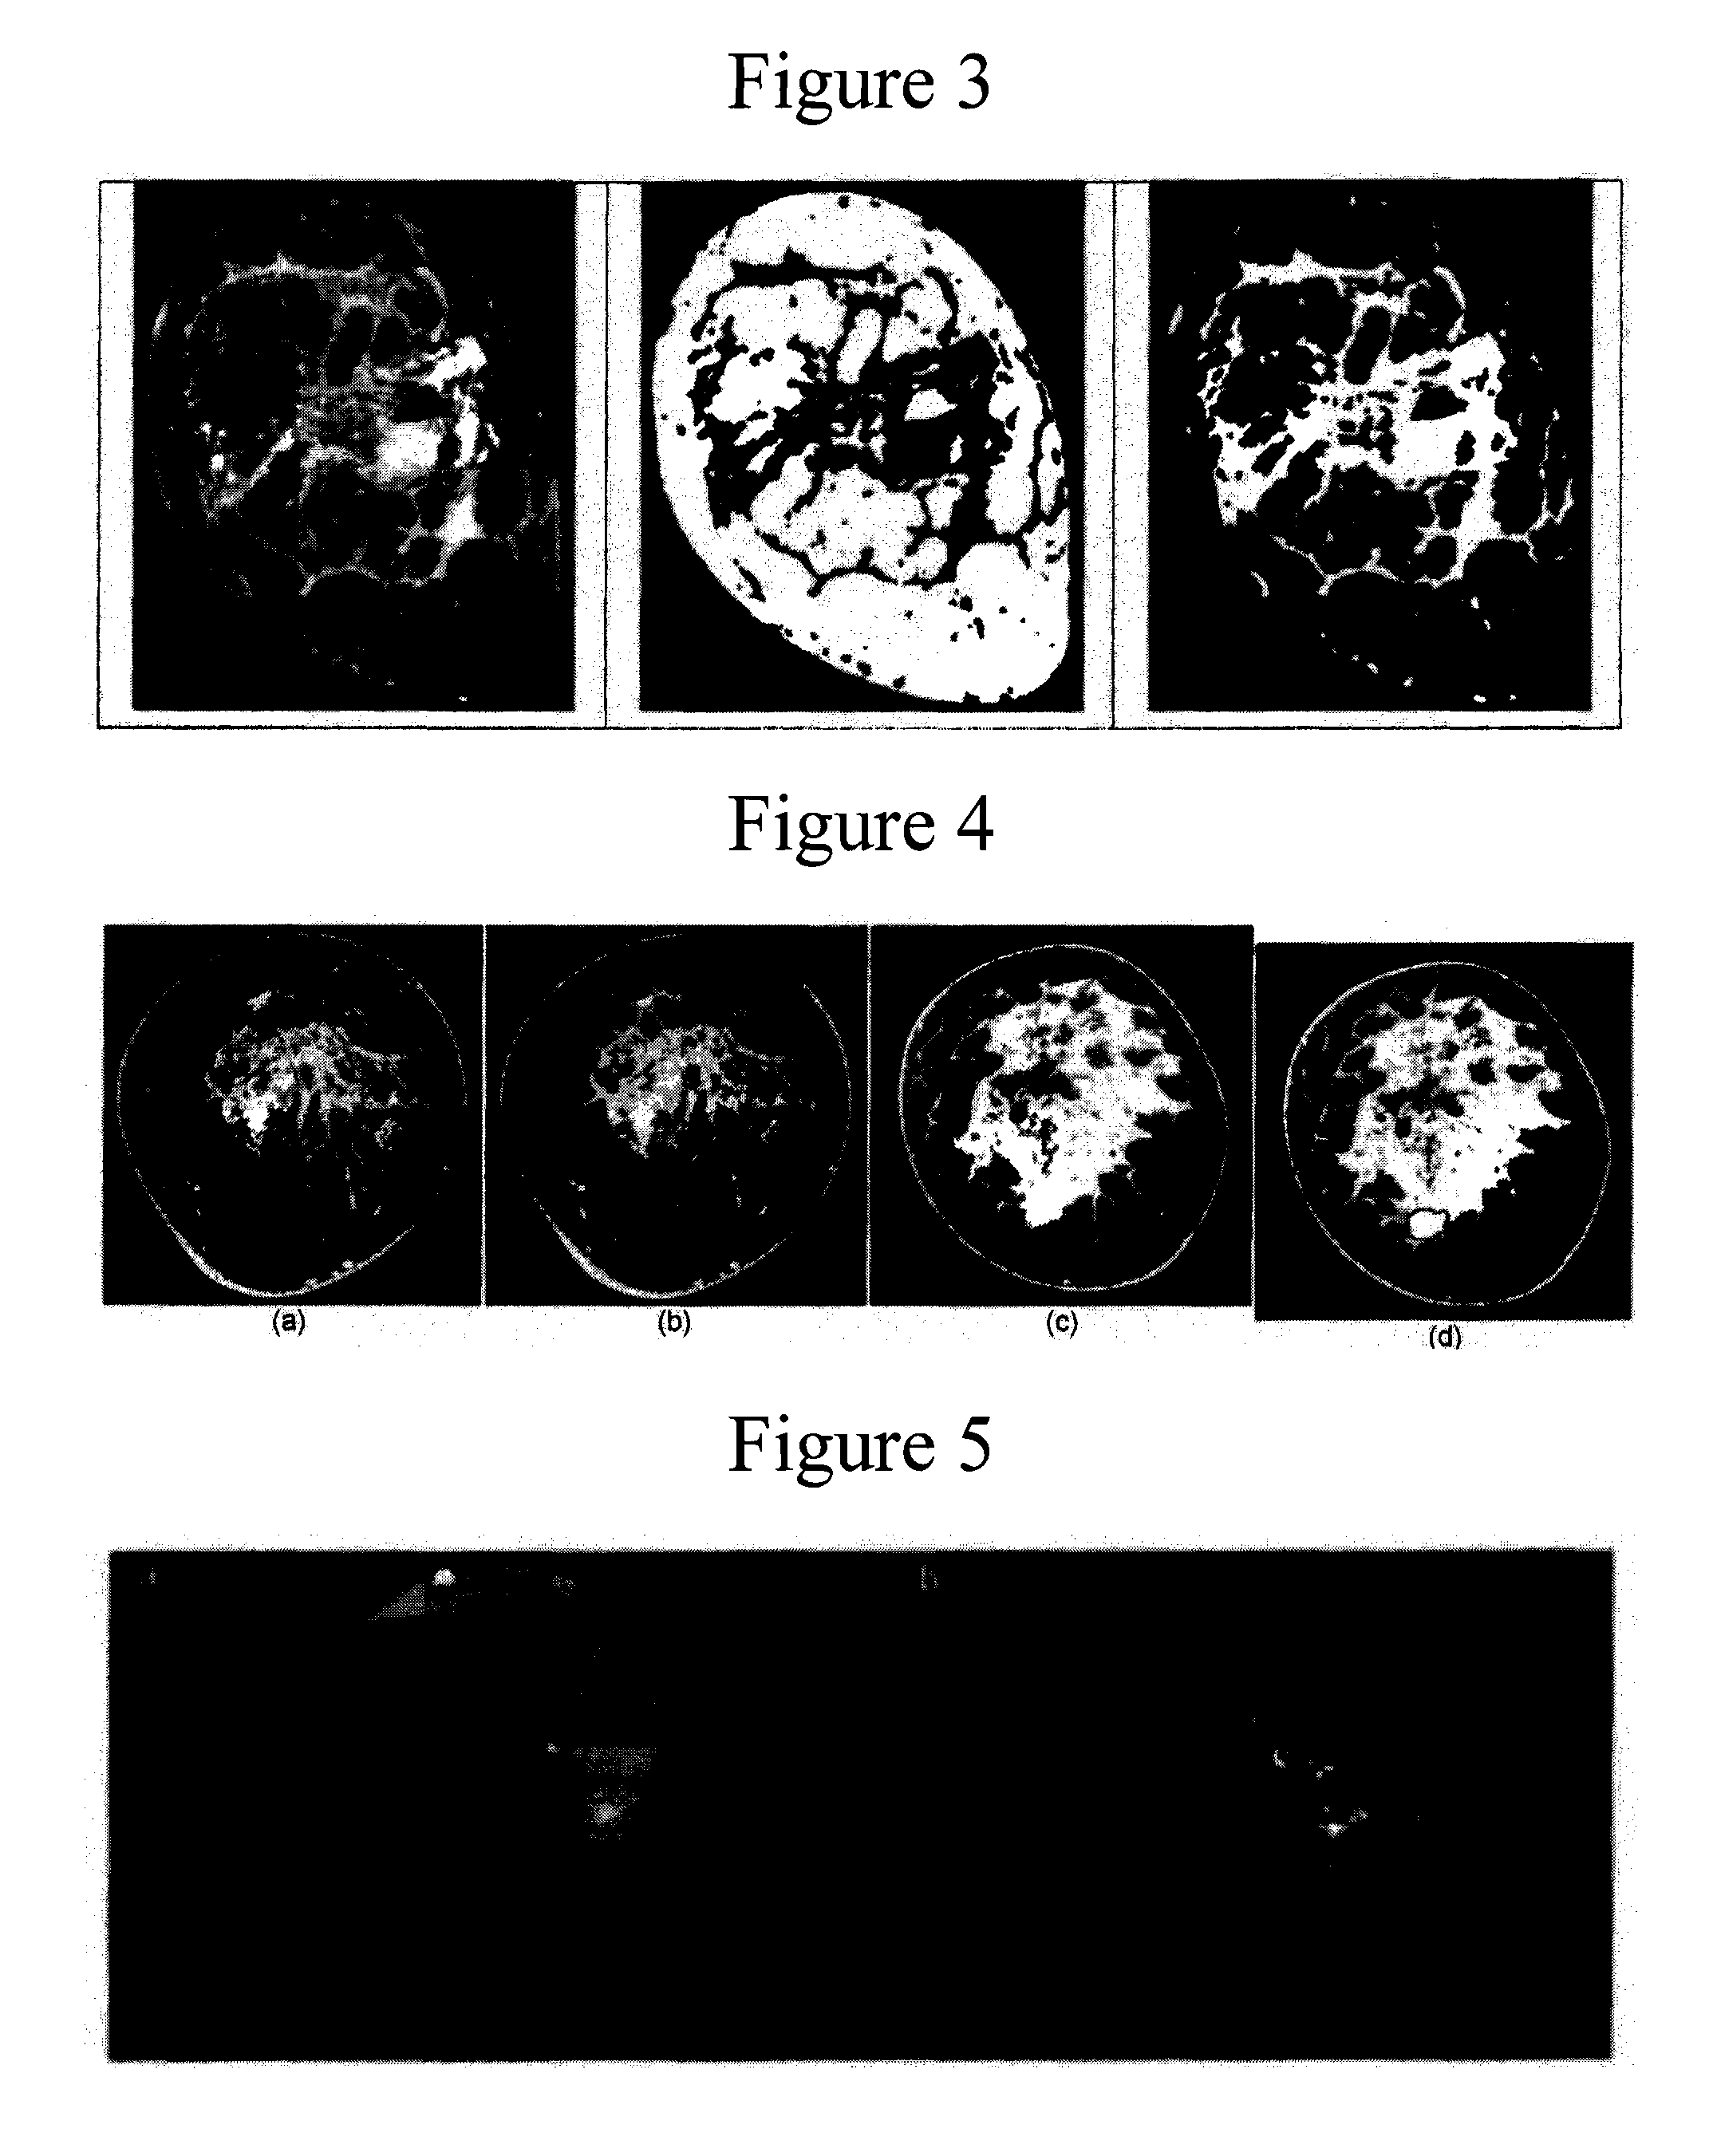 Method and apparatus for cone beam breast CT image-based computer-aided detection and diagnosis